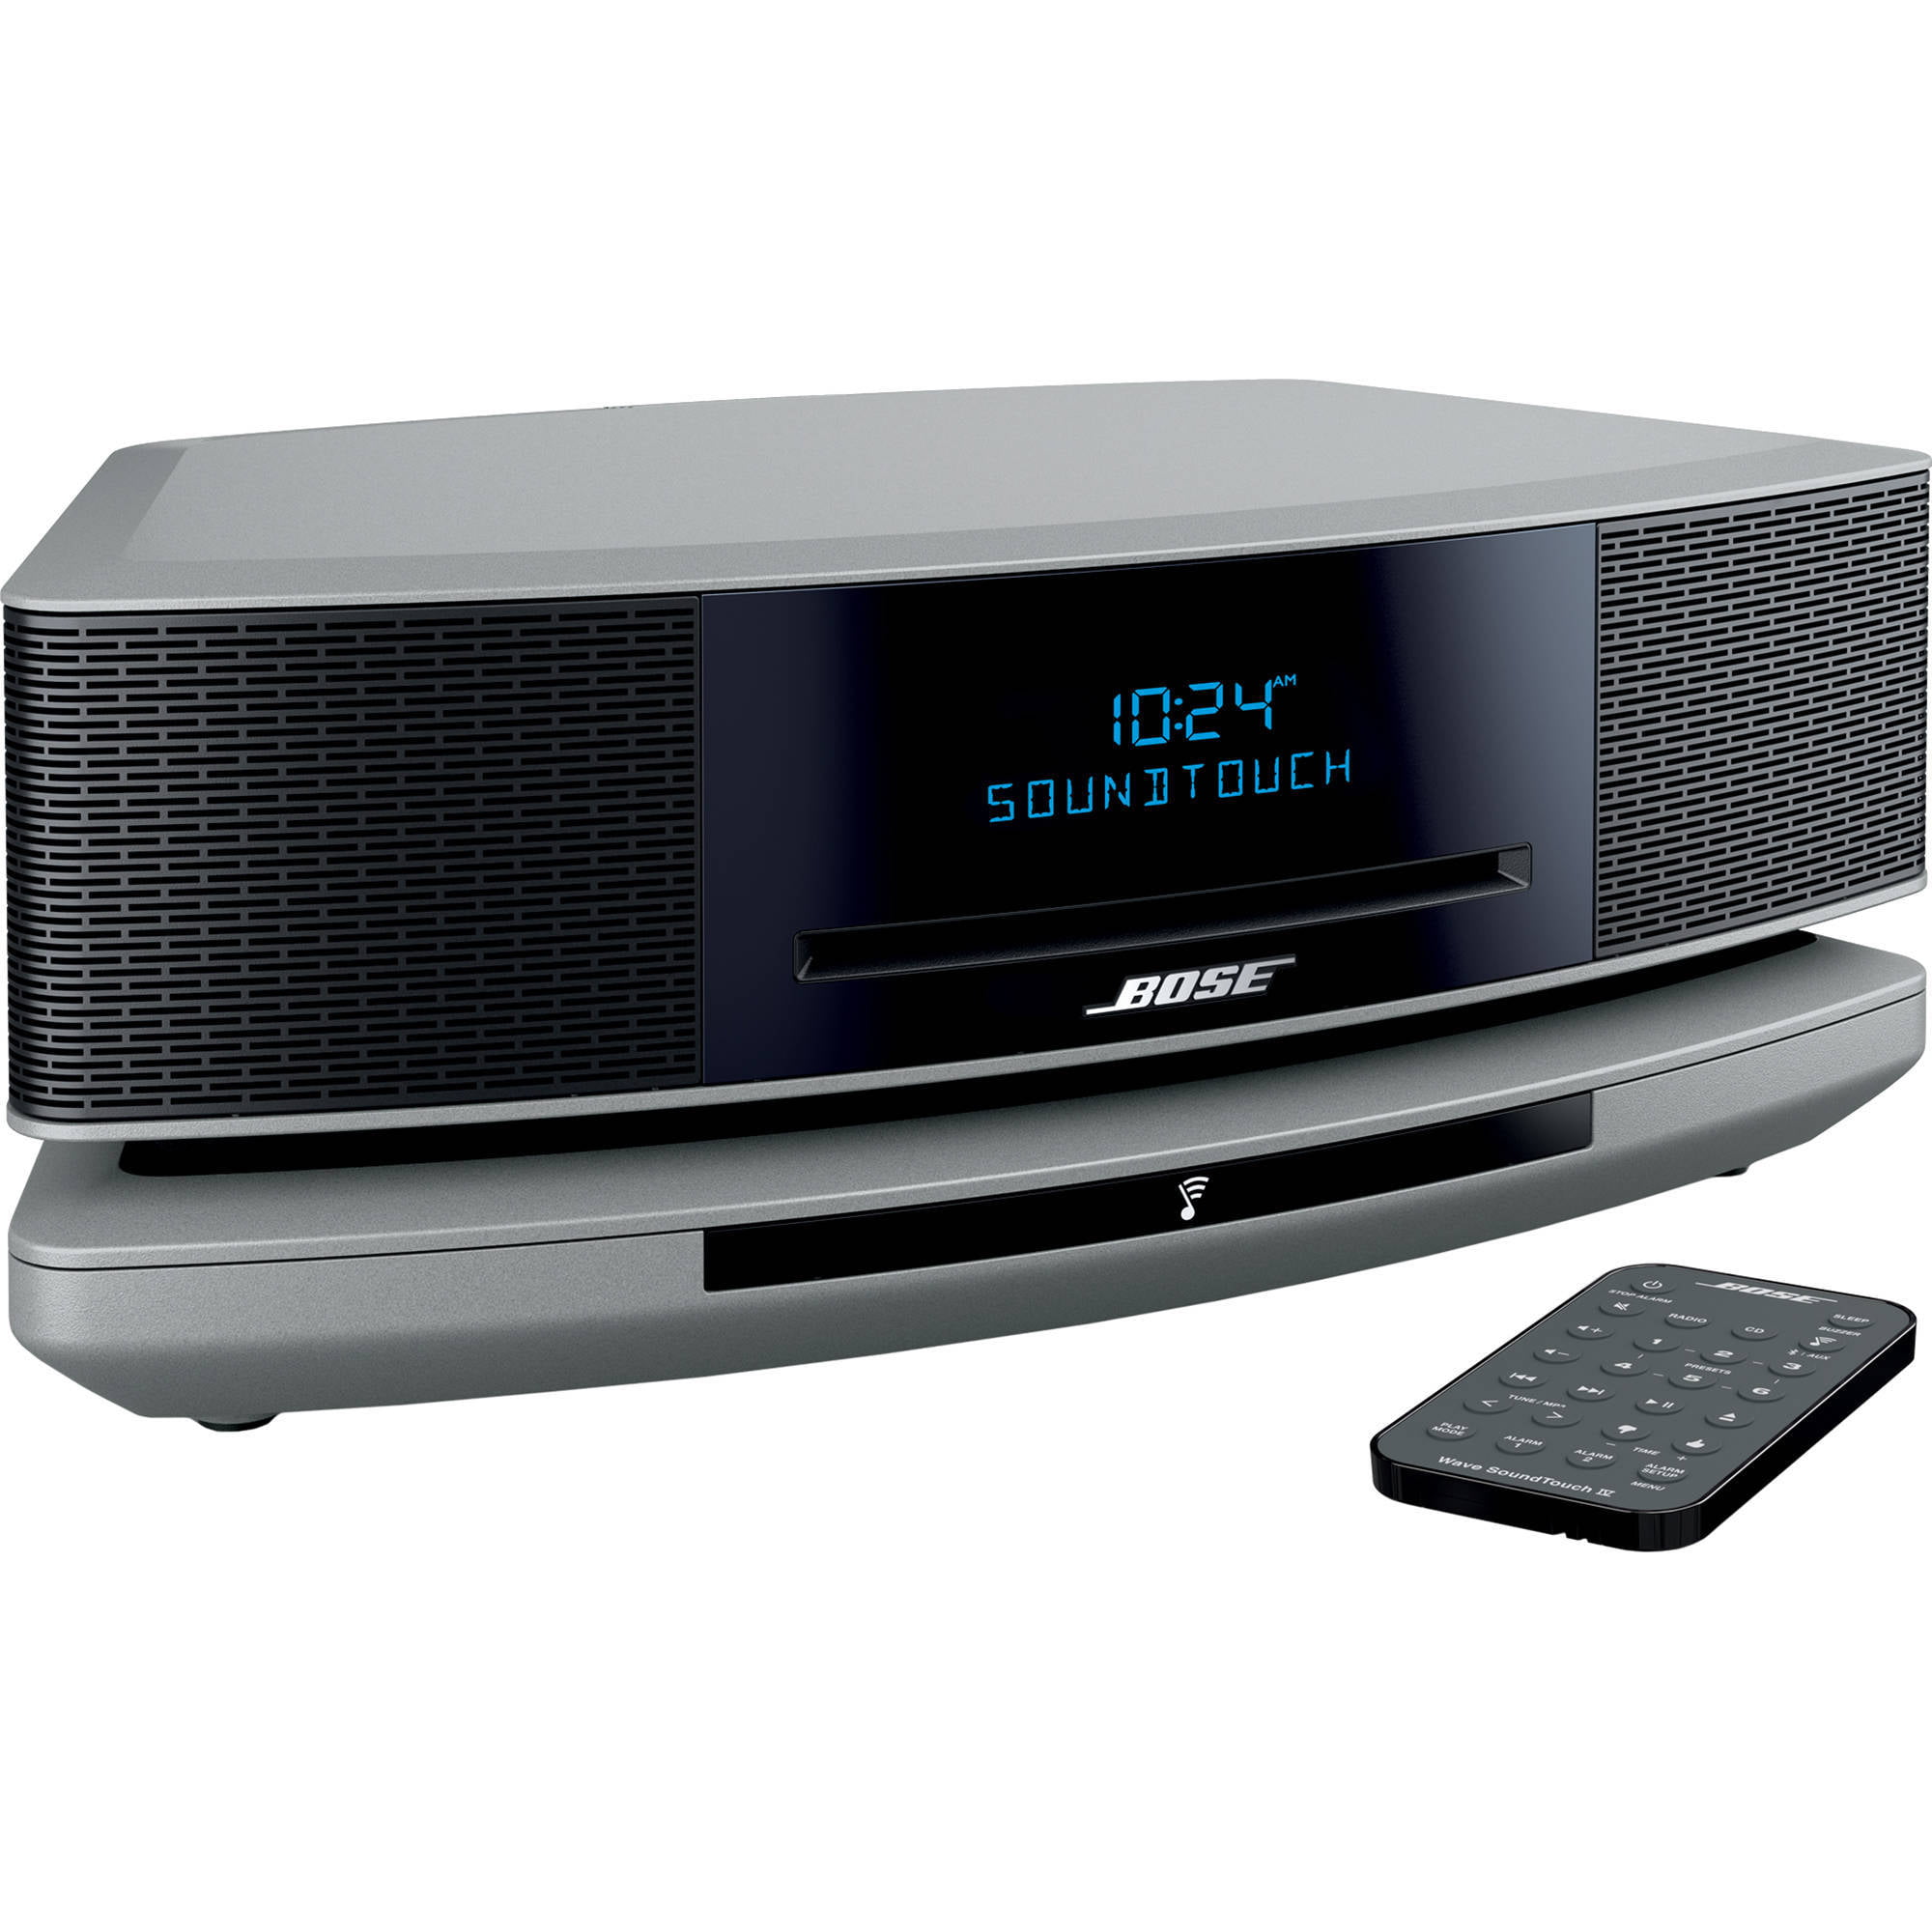 Bose Wave SoundTouch music system IV - Silver - Walmart.com